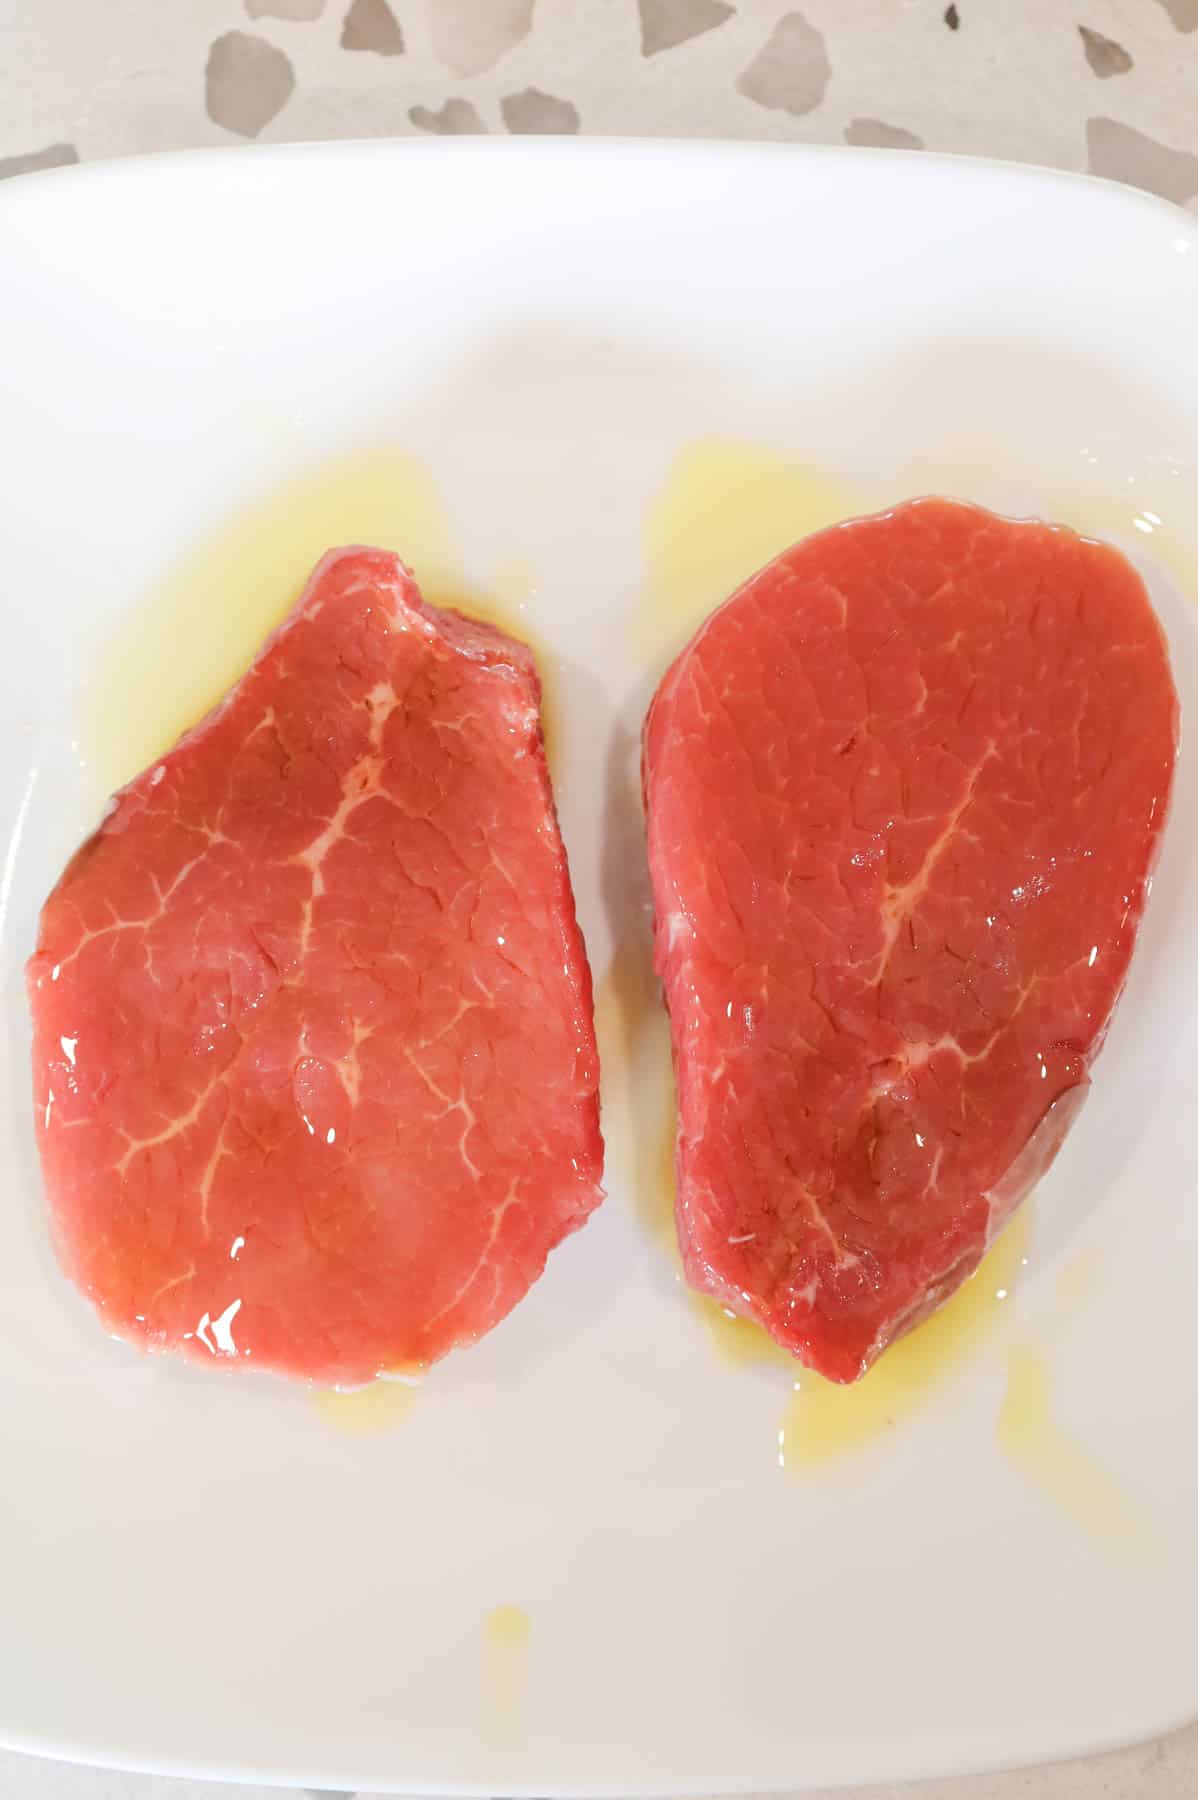 steaks coated in olive oil on a plate